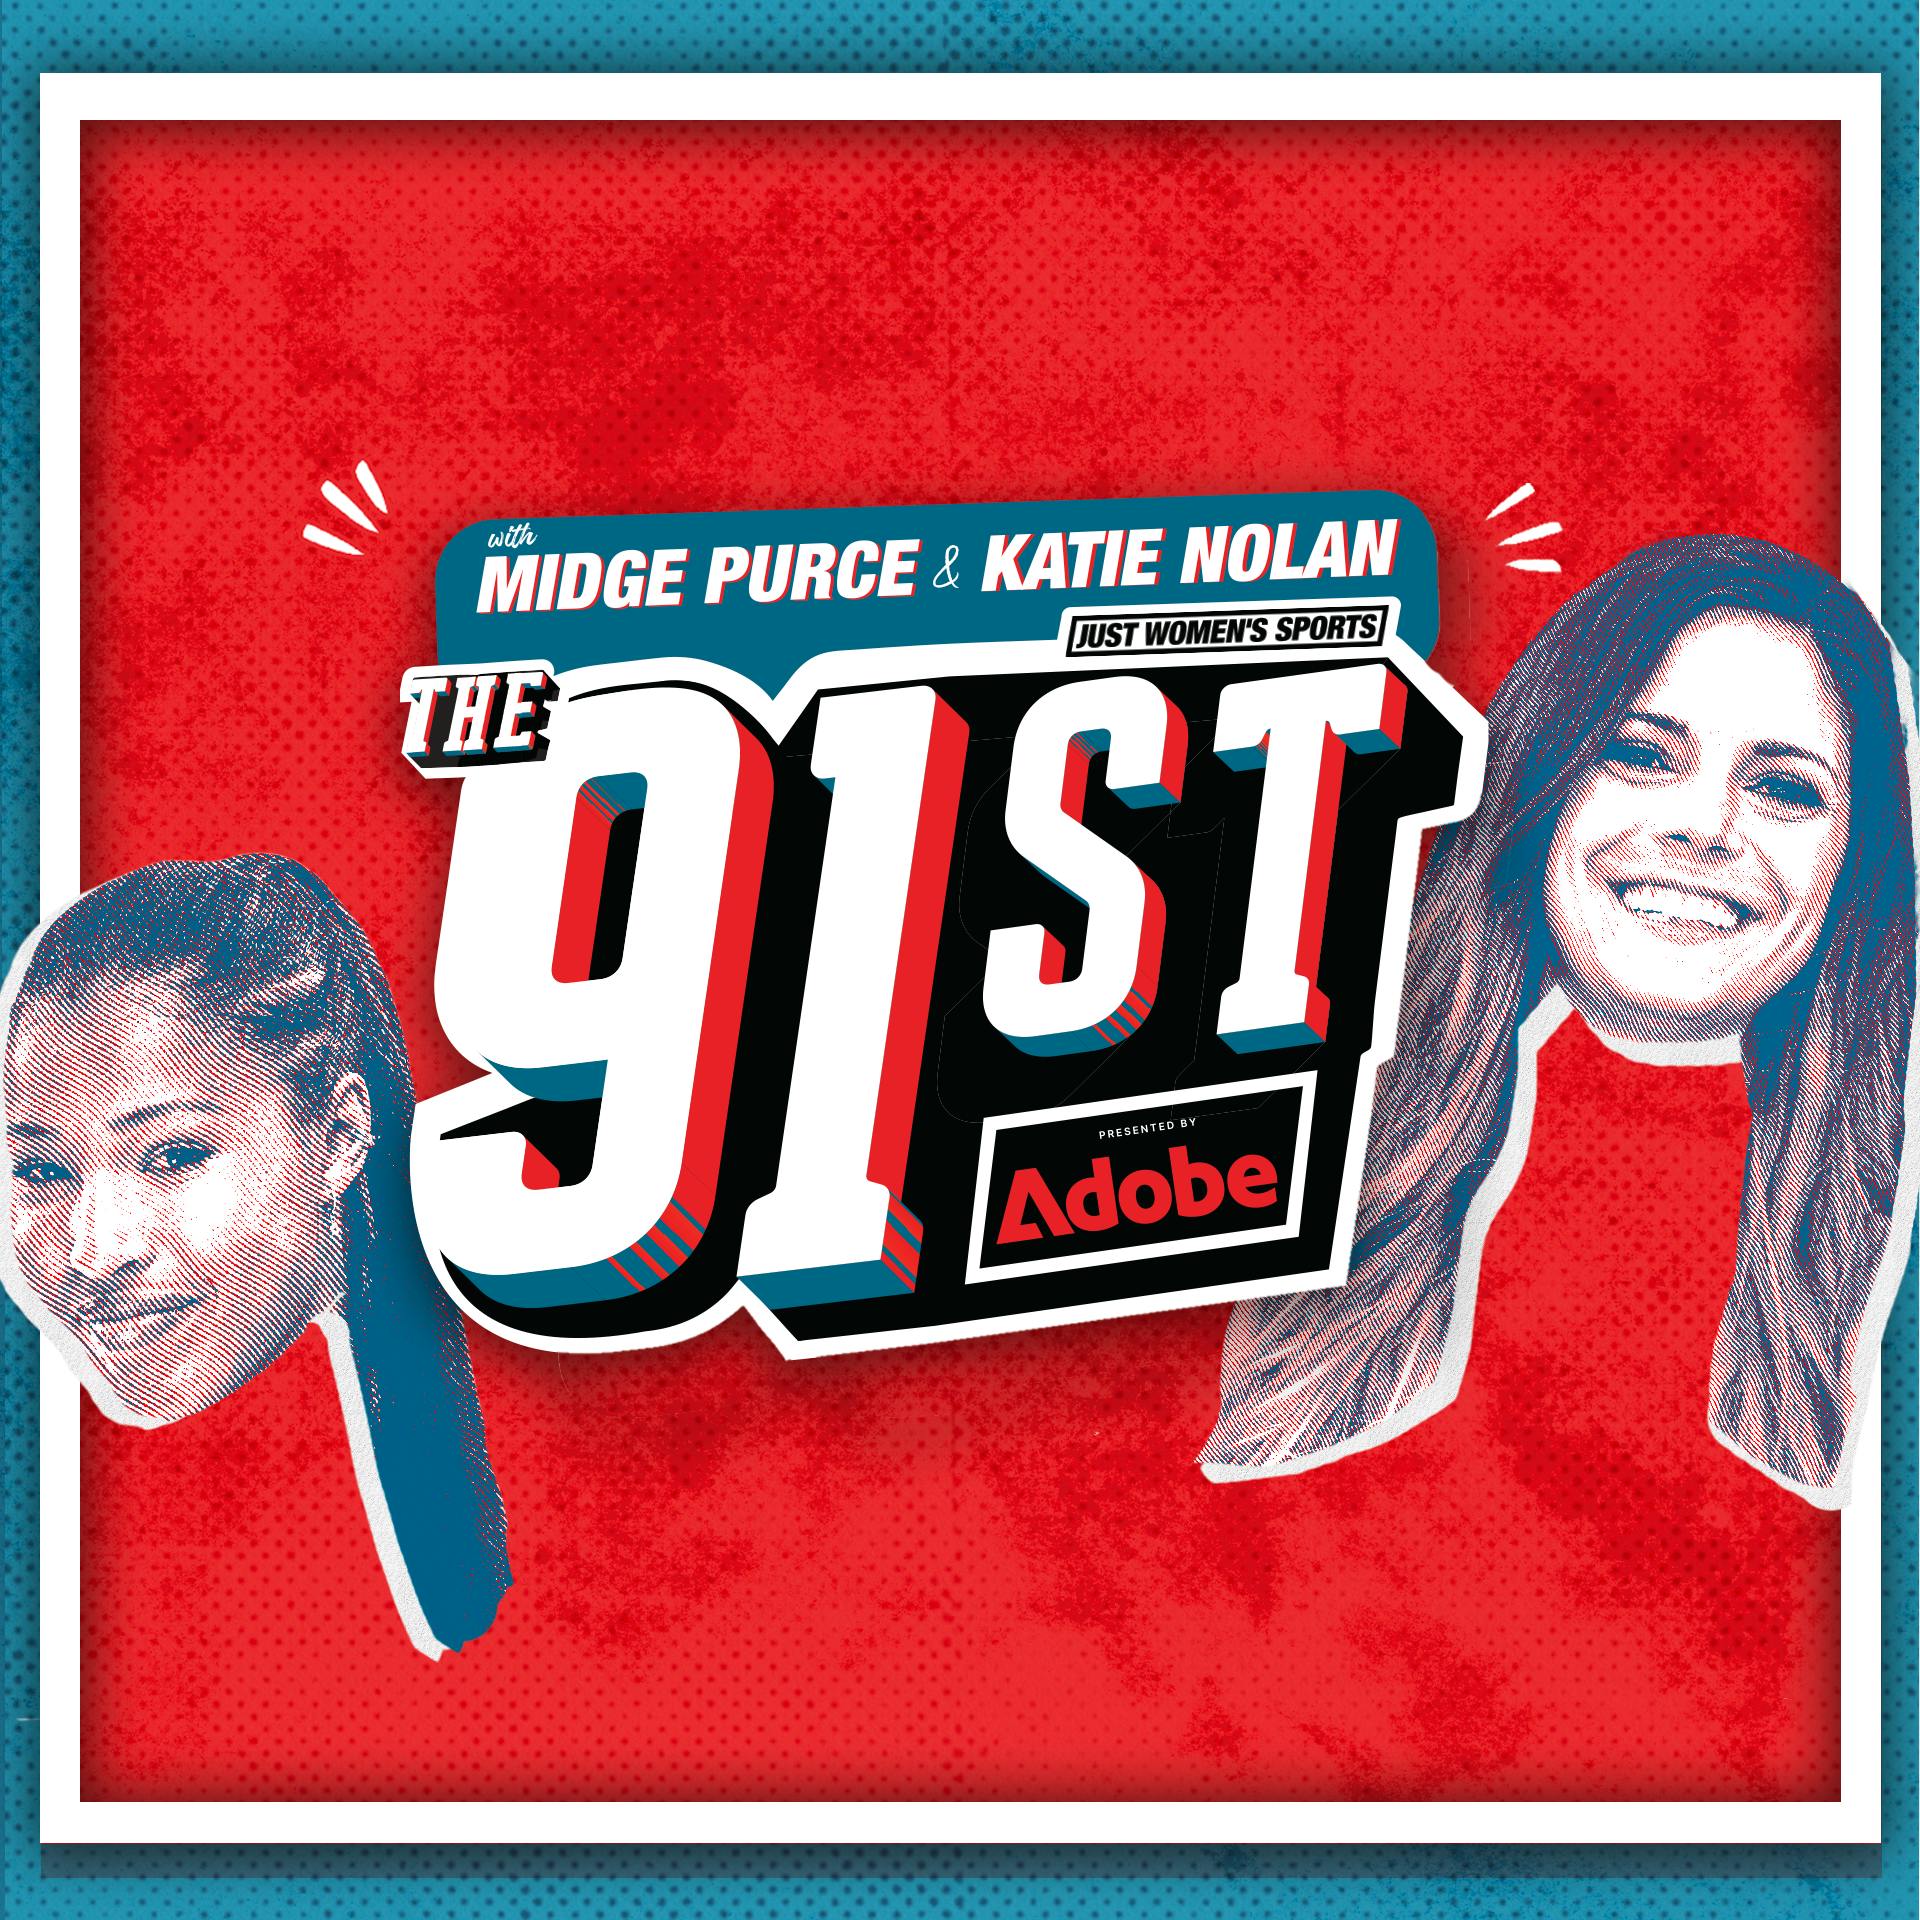 Quarterfinal Drama with Brandi Chastain | The 91st with Midge Purce and Katie Nolan presented by Adobe